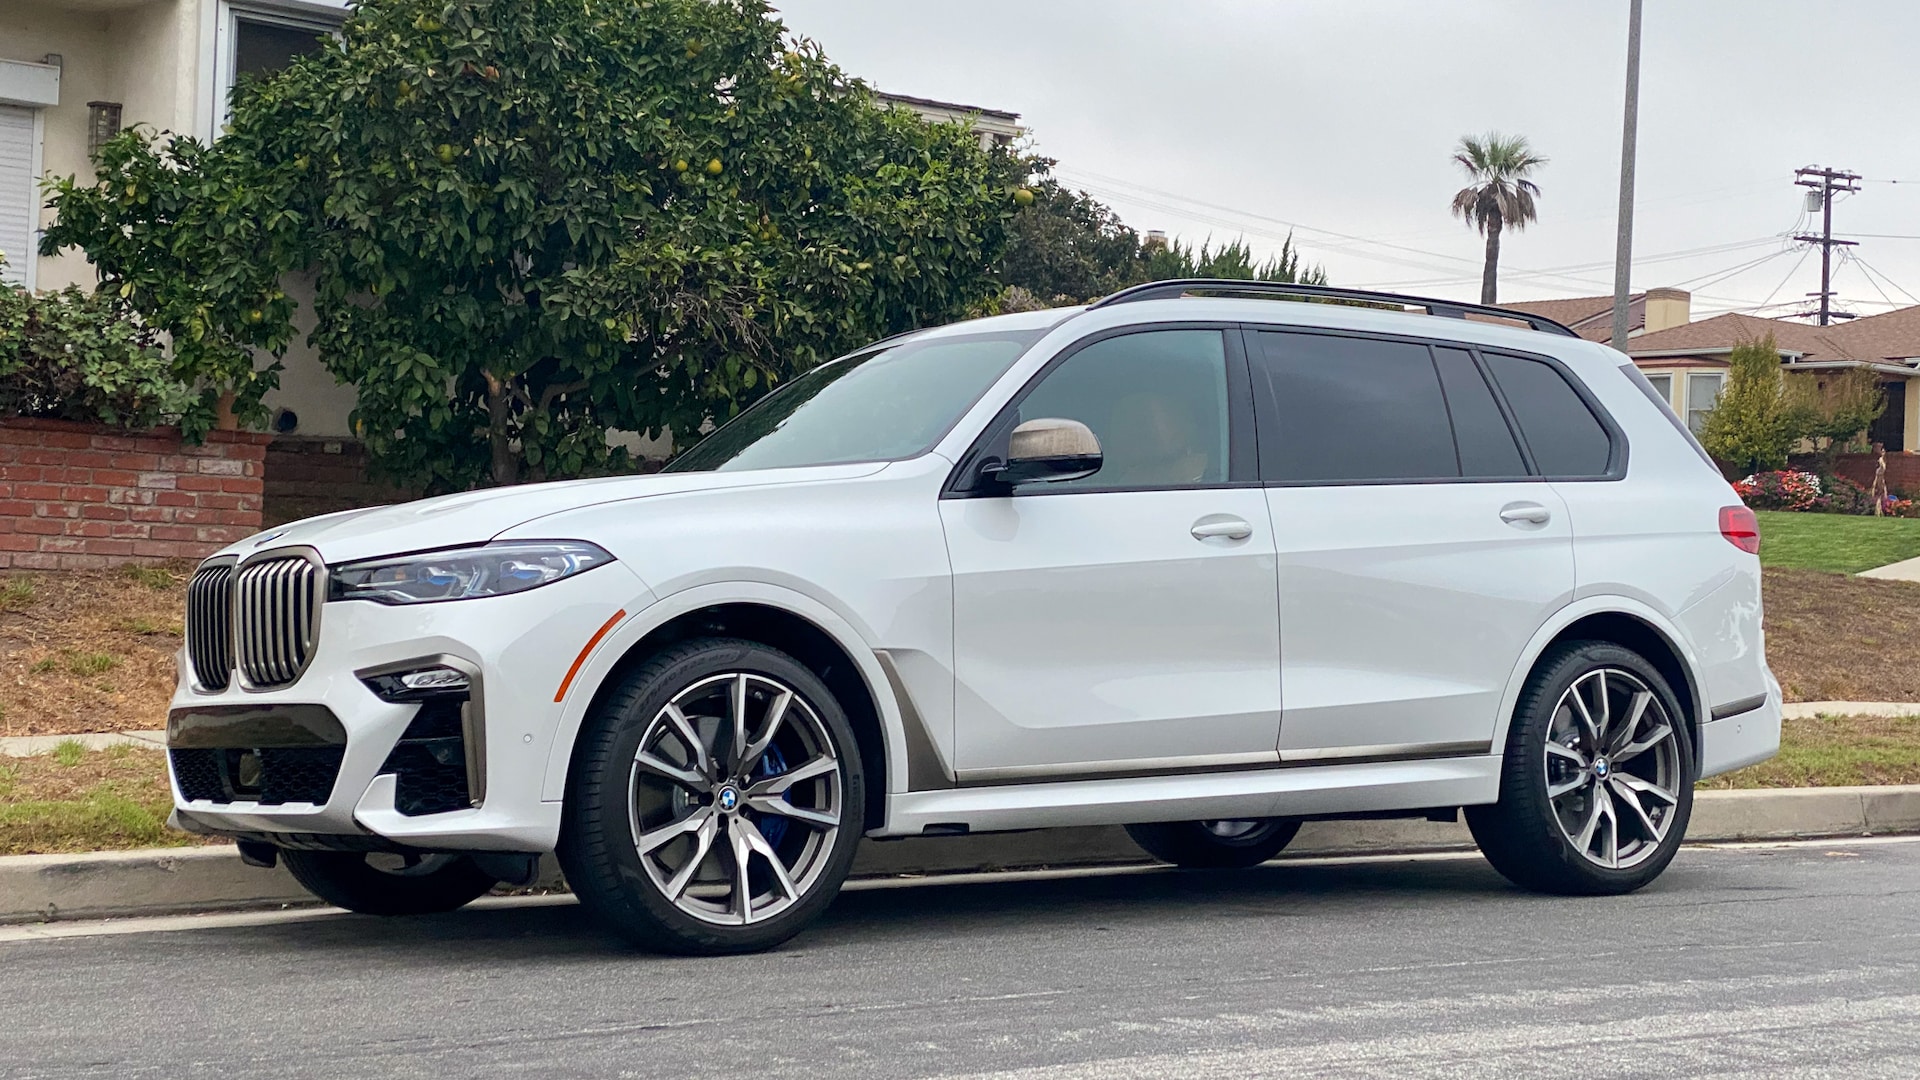 Driven: BMW Gets It Right With the 2020 X7 M50i